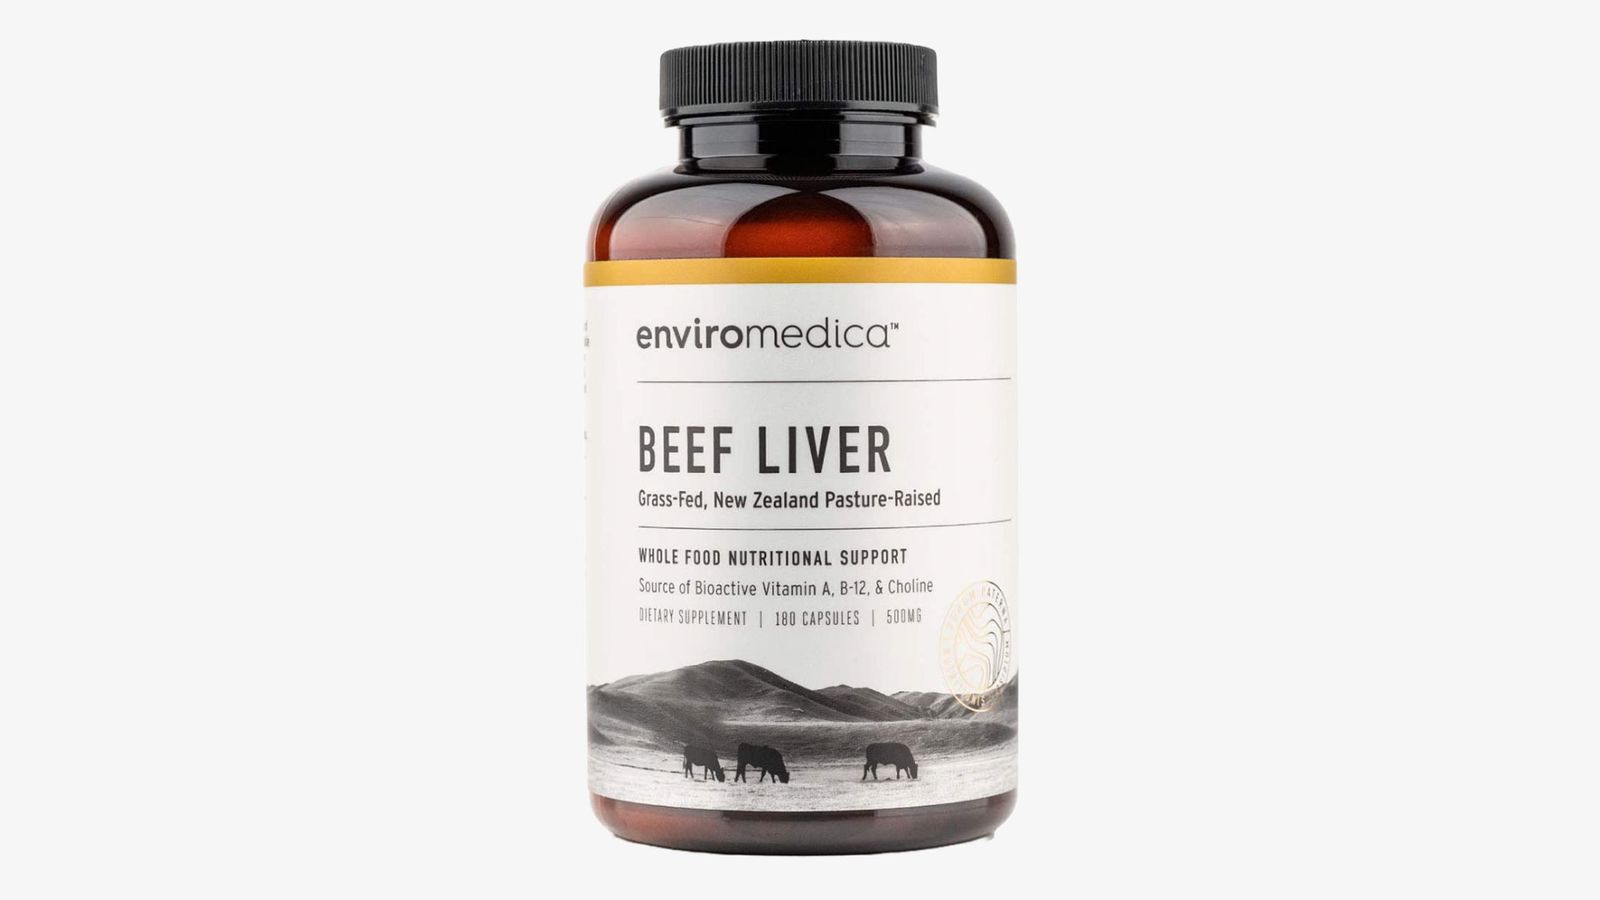 Enviromedica Freeze Dried Beef Liver Supplement Capsules product image of a brown container with a black lid and light brown and orange branding.